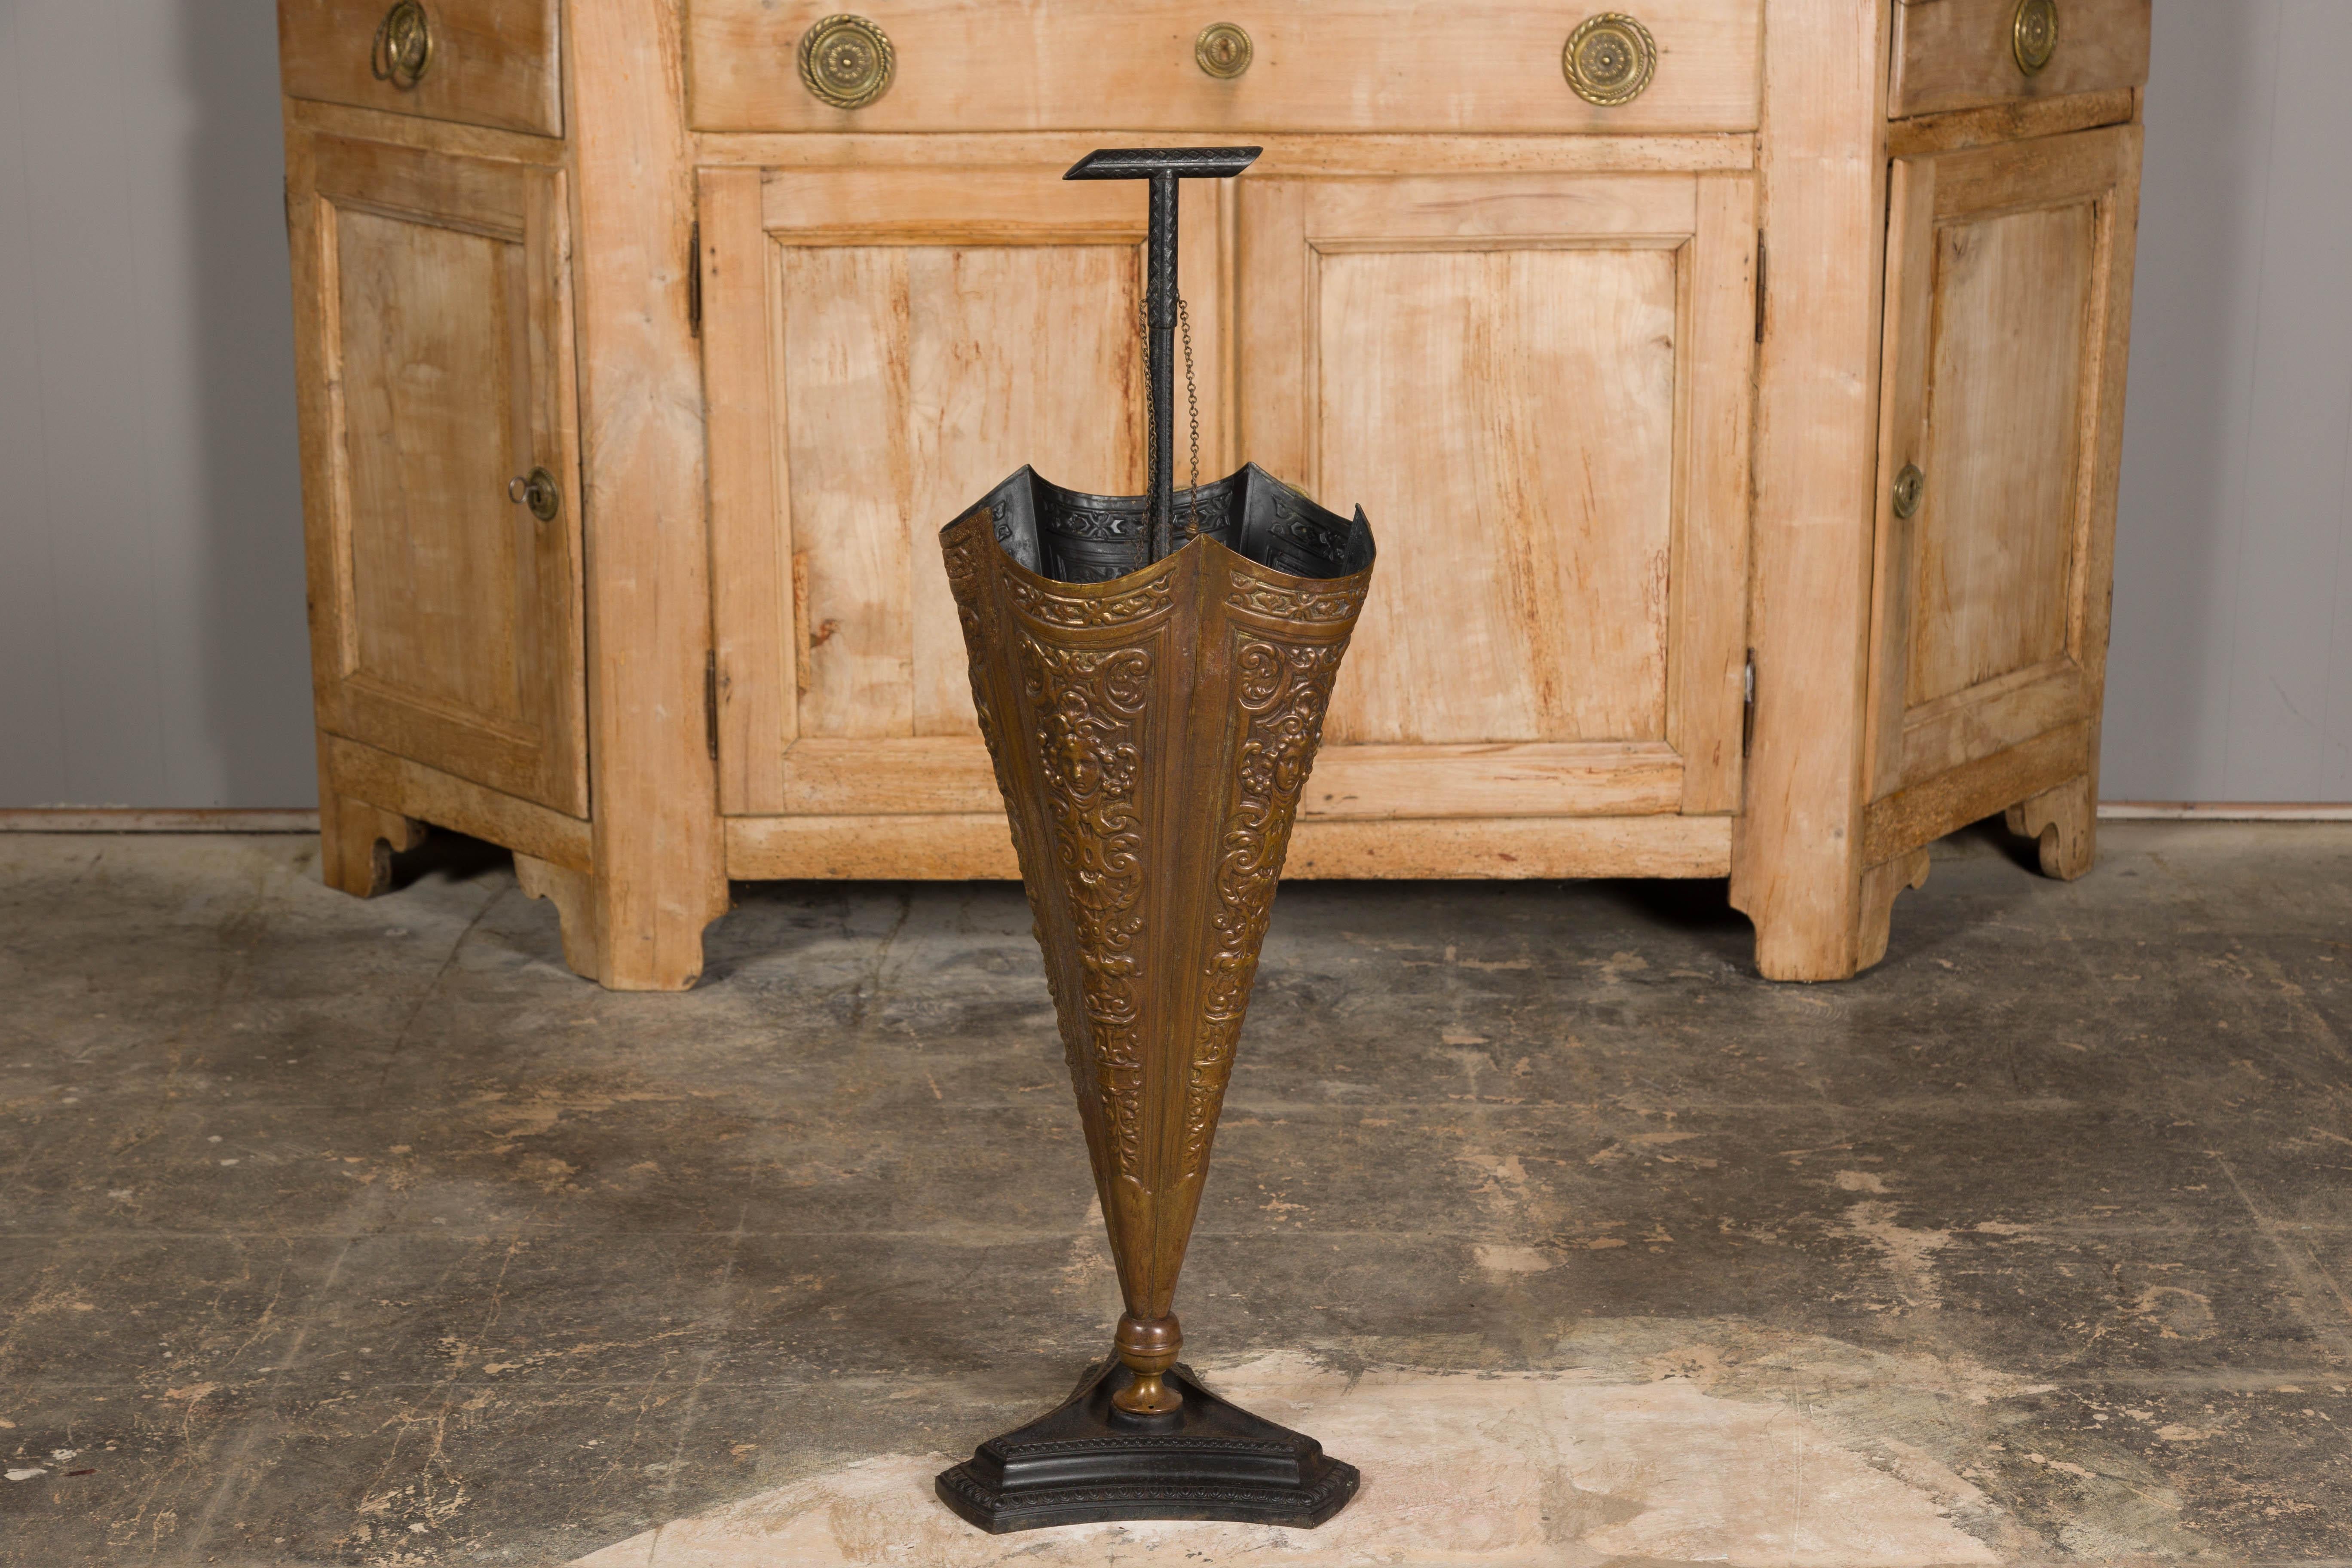 English 1920-1930 Brass Umbrella Stand with Raised Motifs and Tripartite Base For Sale 8